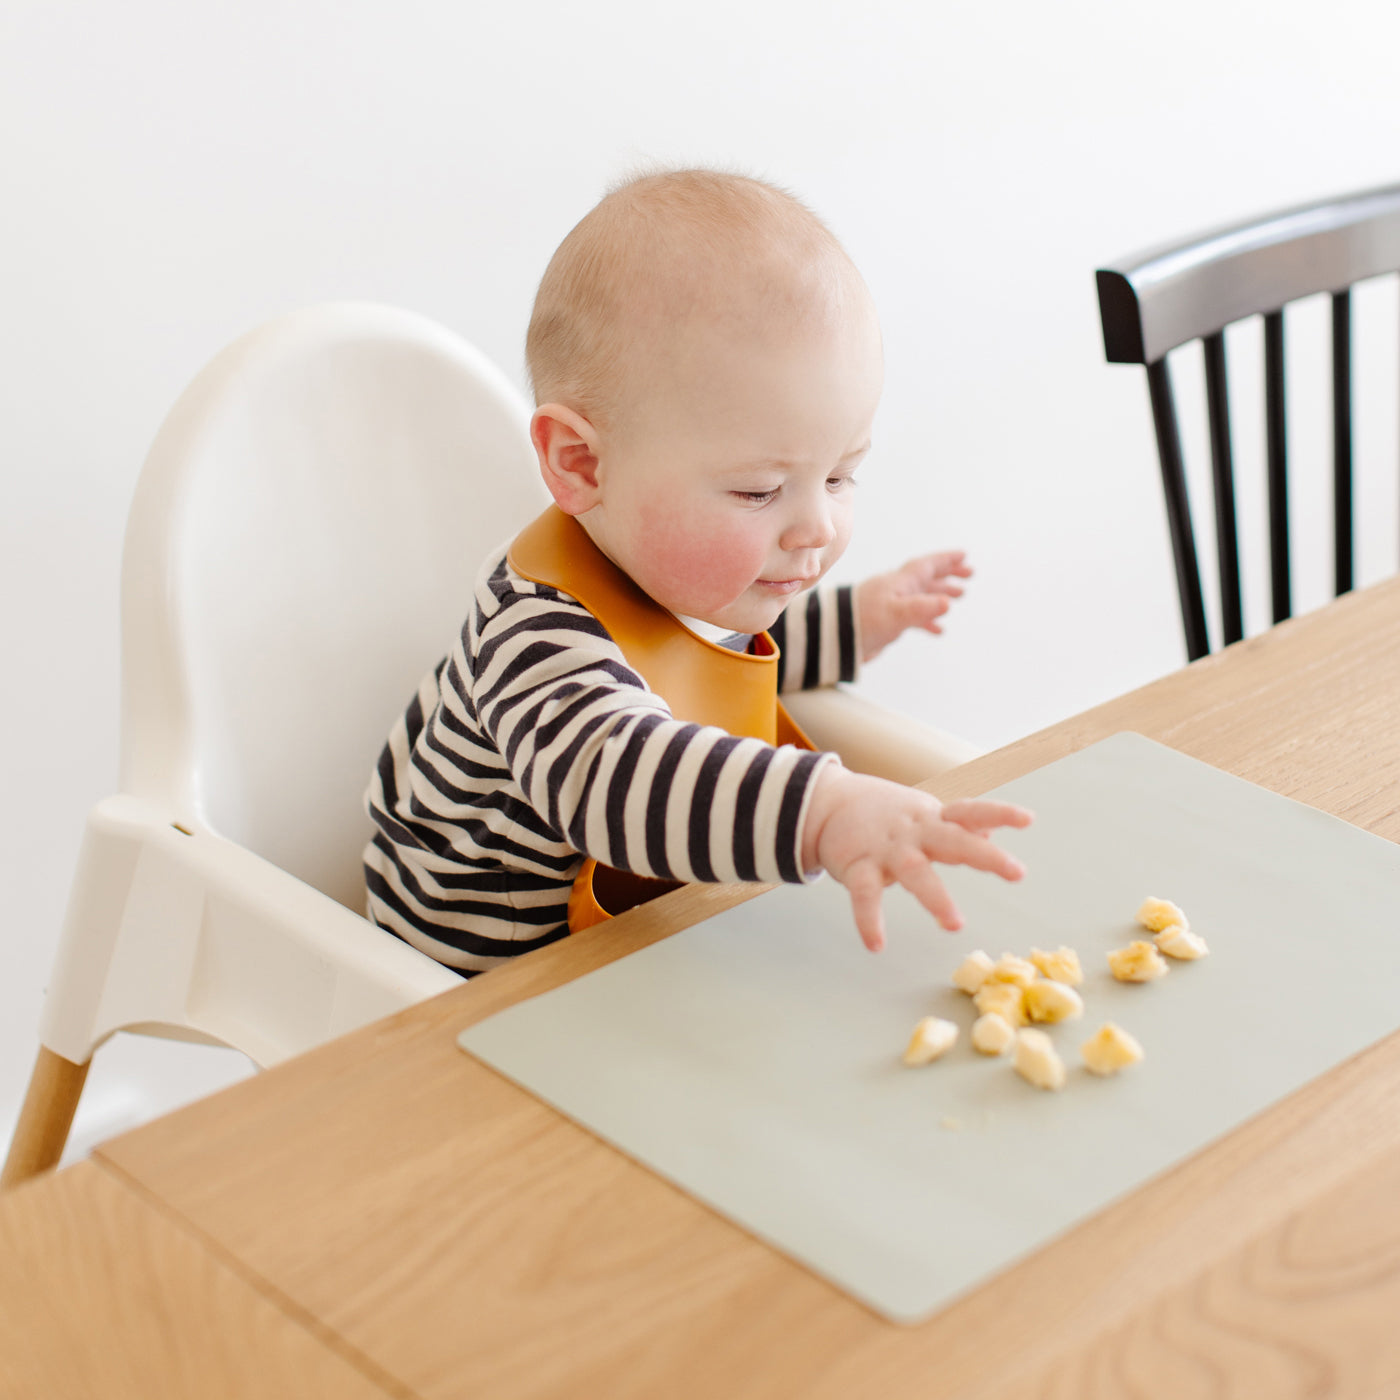 The Cibo Crumb Catcher Silicone Placemat for Babies, Toddlers